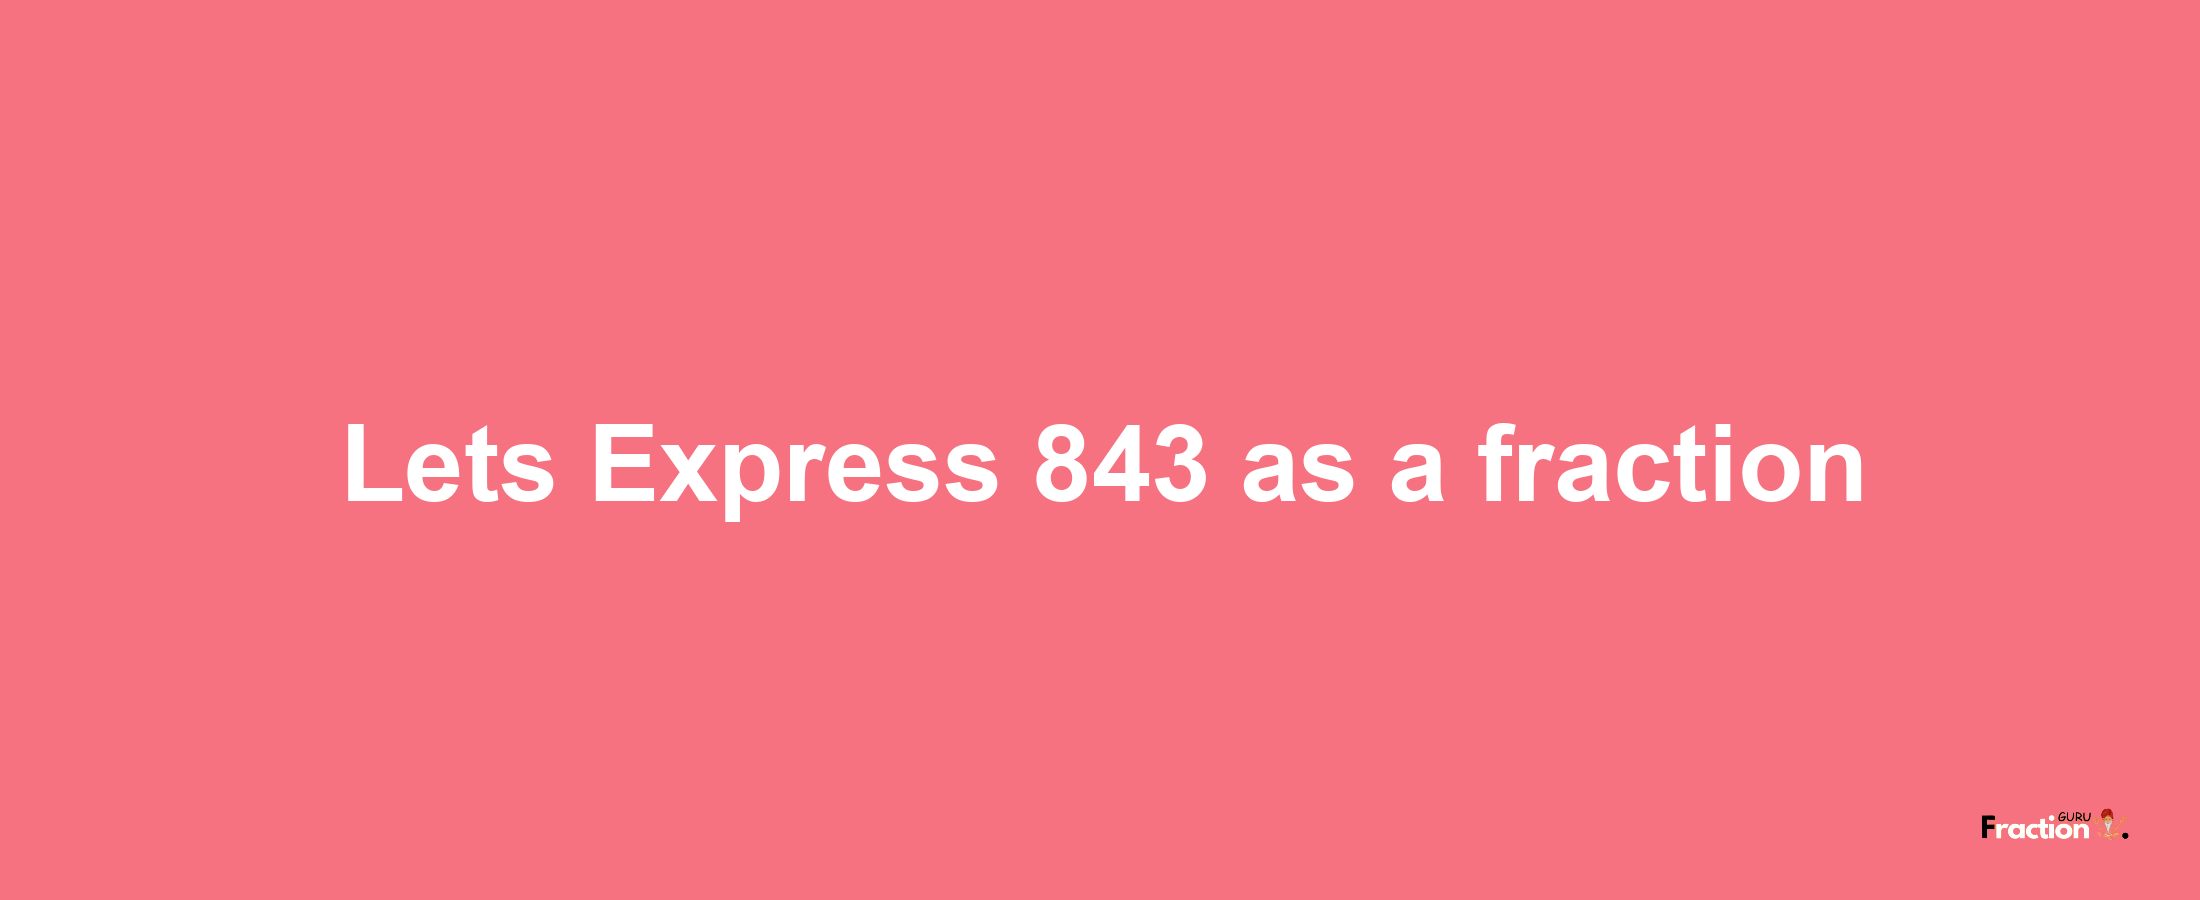 Lets Express 843 as afraction